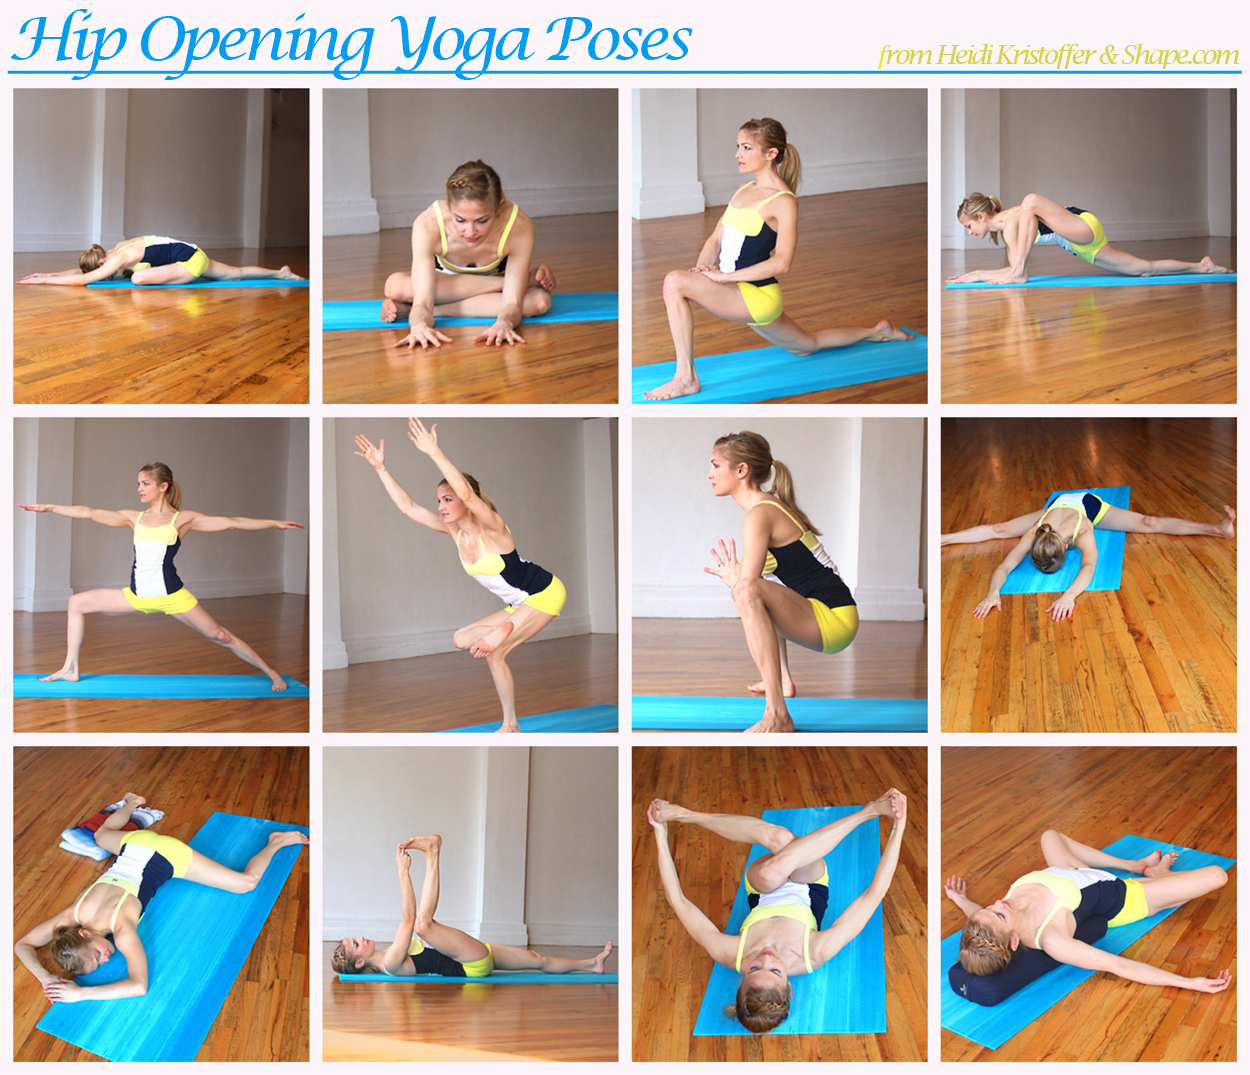 Life Poses how Opening Hip Yoga  poses   to yoga AVAC